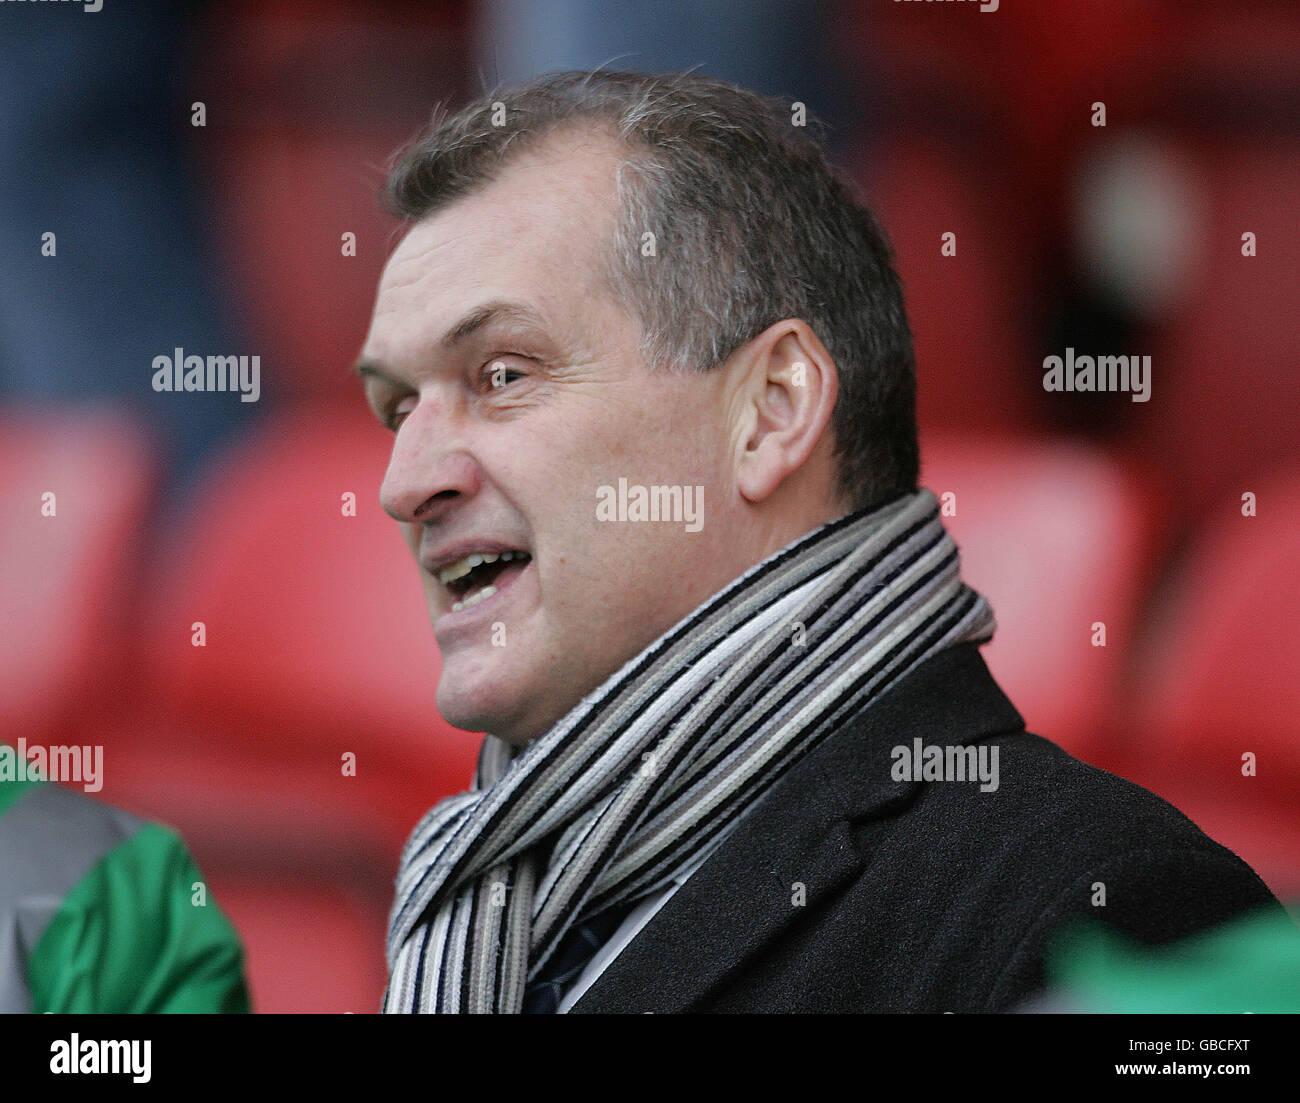 Crewe Alexandra's manager Gudjon Thordarson is happy at the result of his first league game in charge during the Coca-Cola Football League One match at the Alexandra Stadium, Crewe. Stock Photo